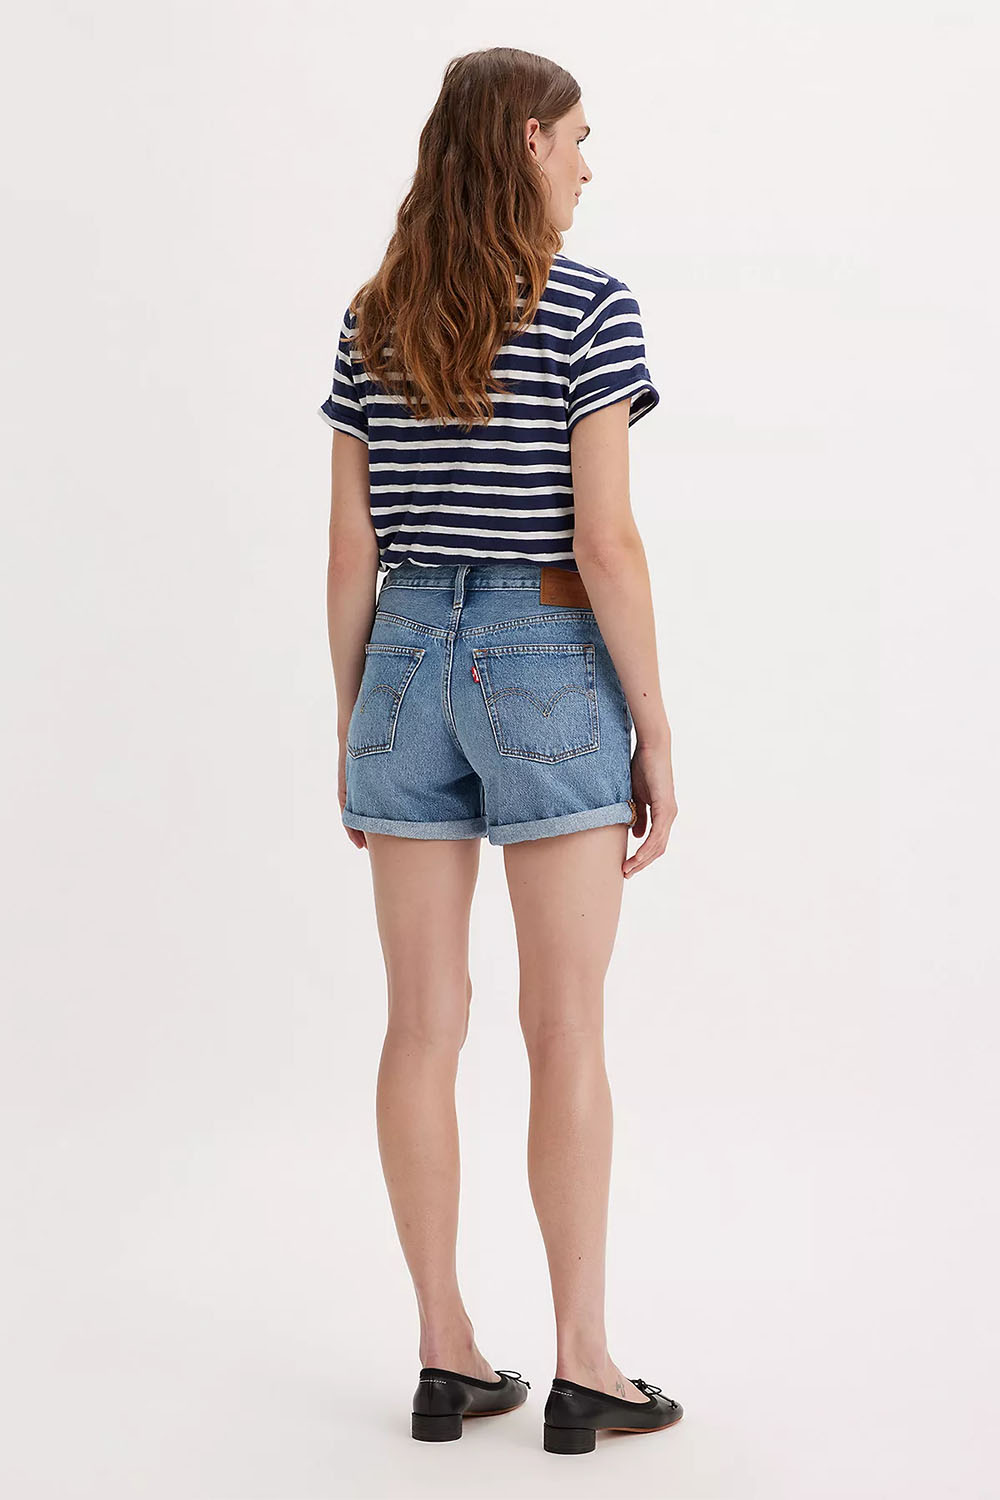 Levis - 501 Rolled Short - Must Be Mine - Back